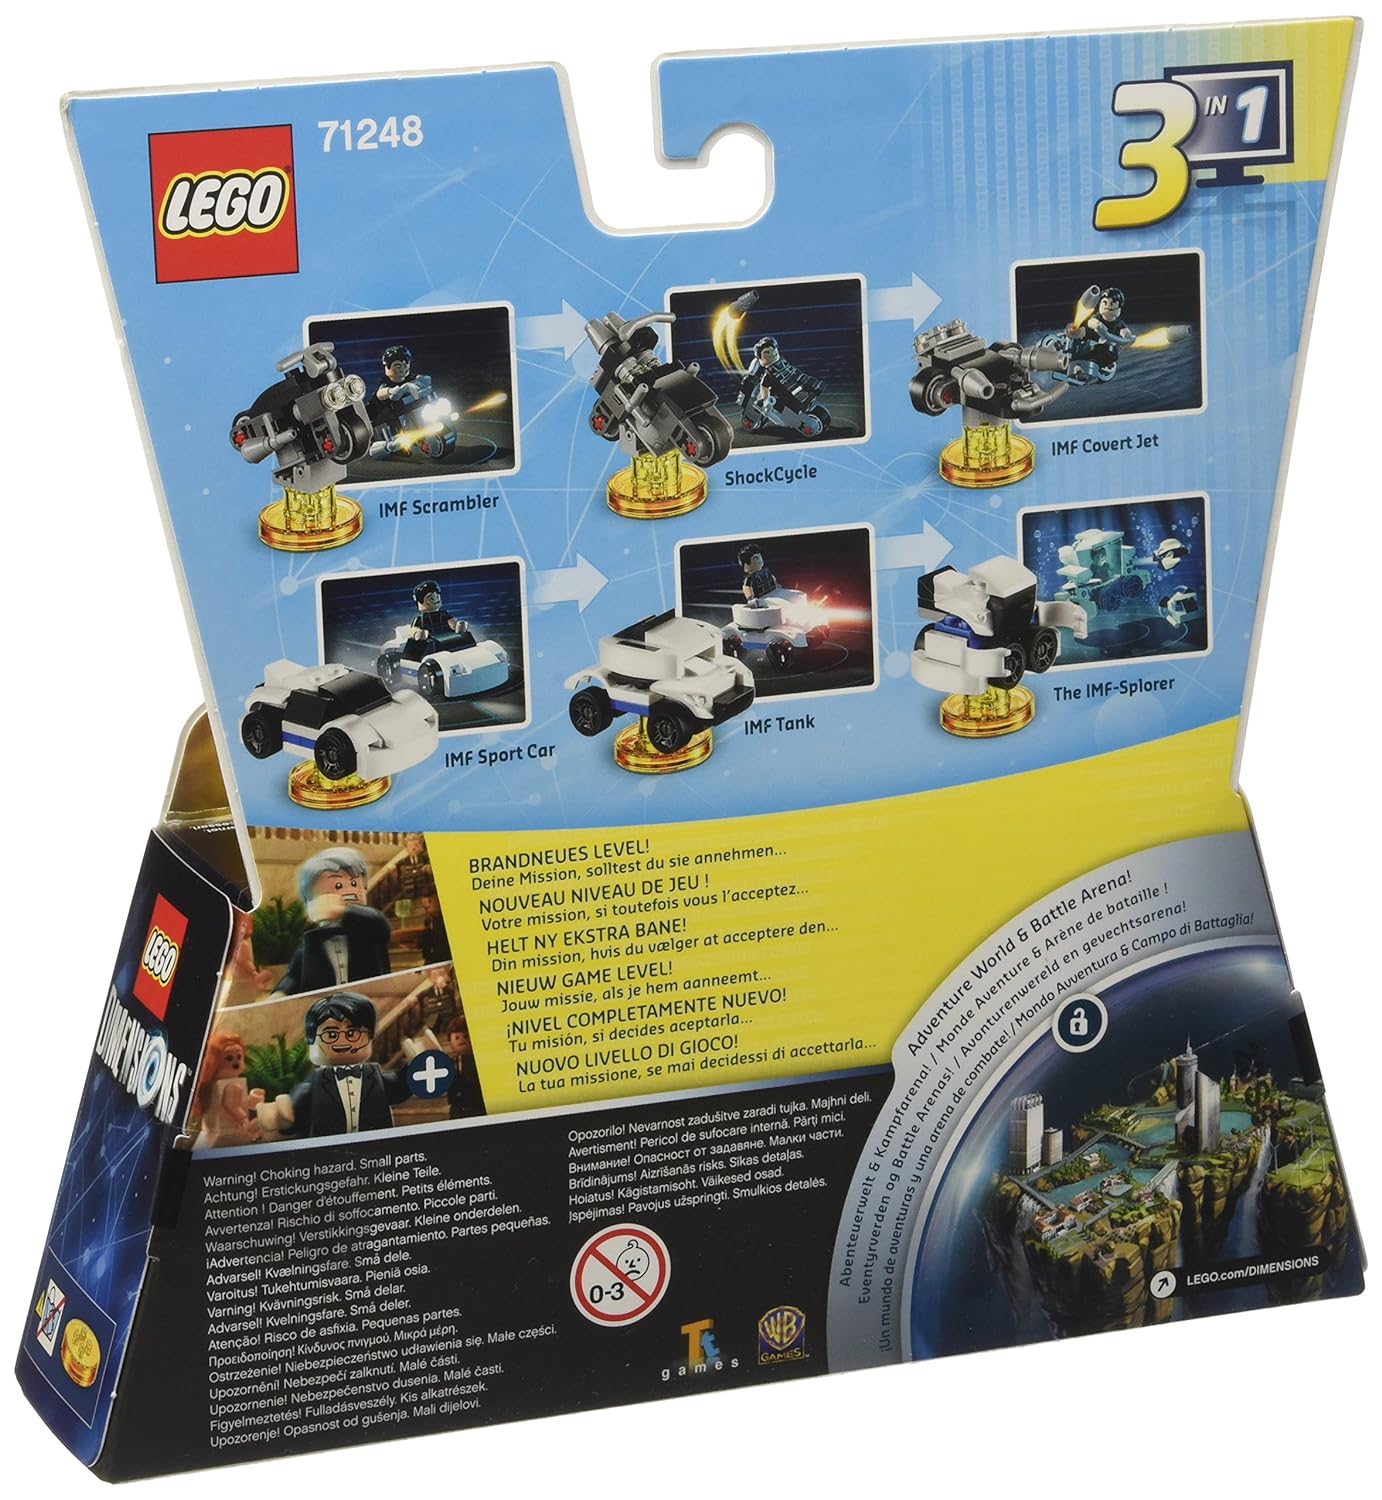 LEGO Dimensions: Sonic Level Pack